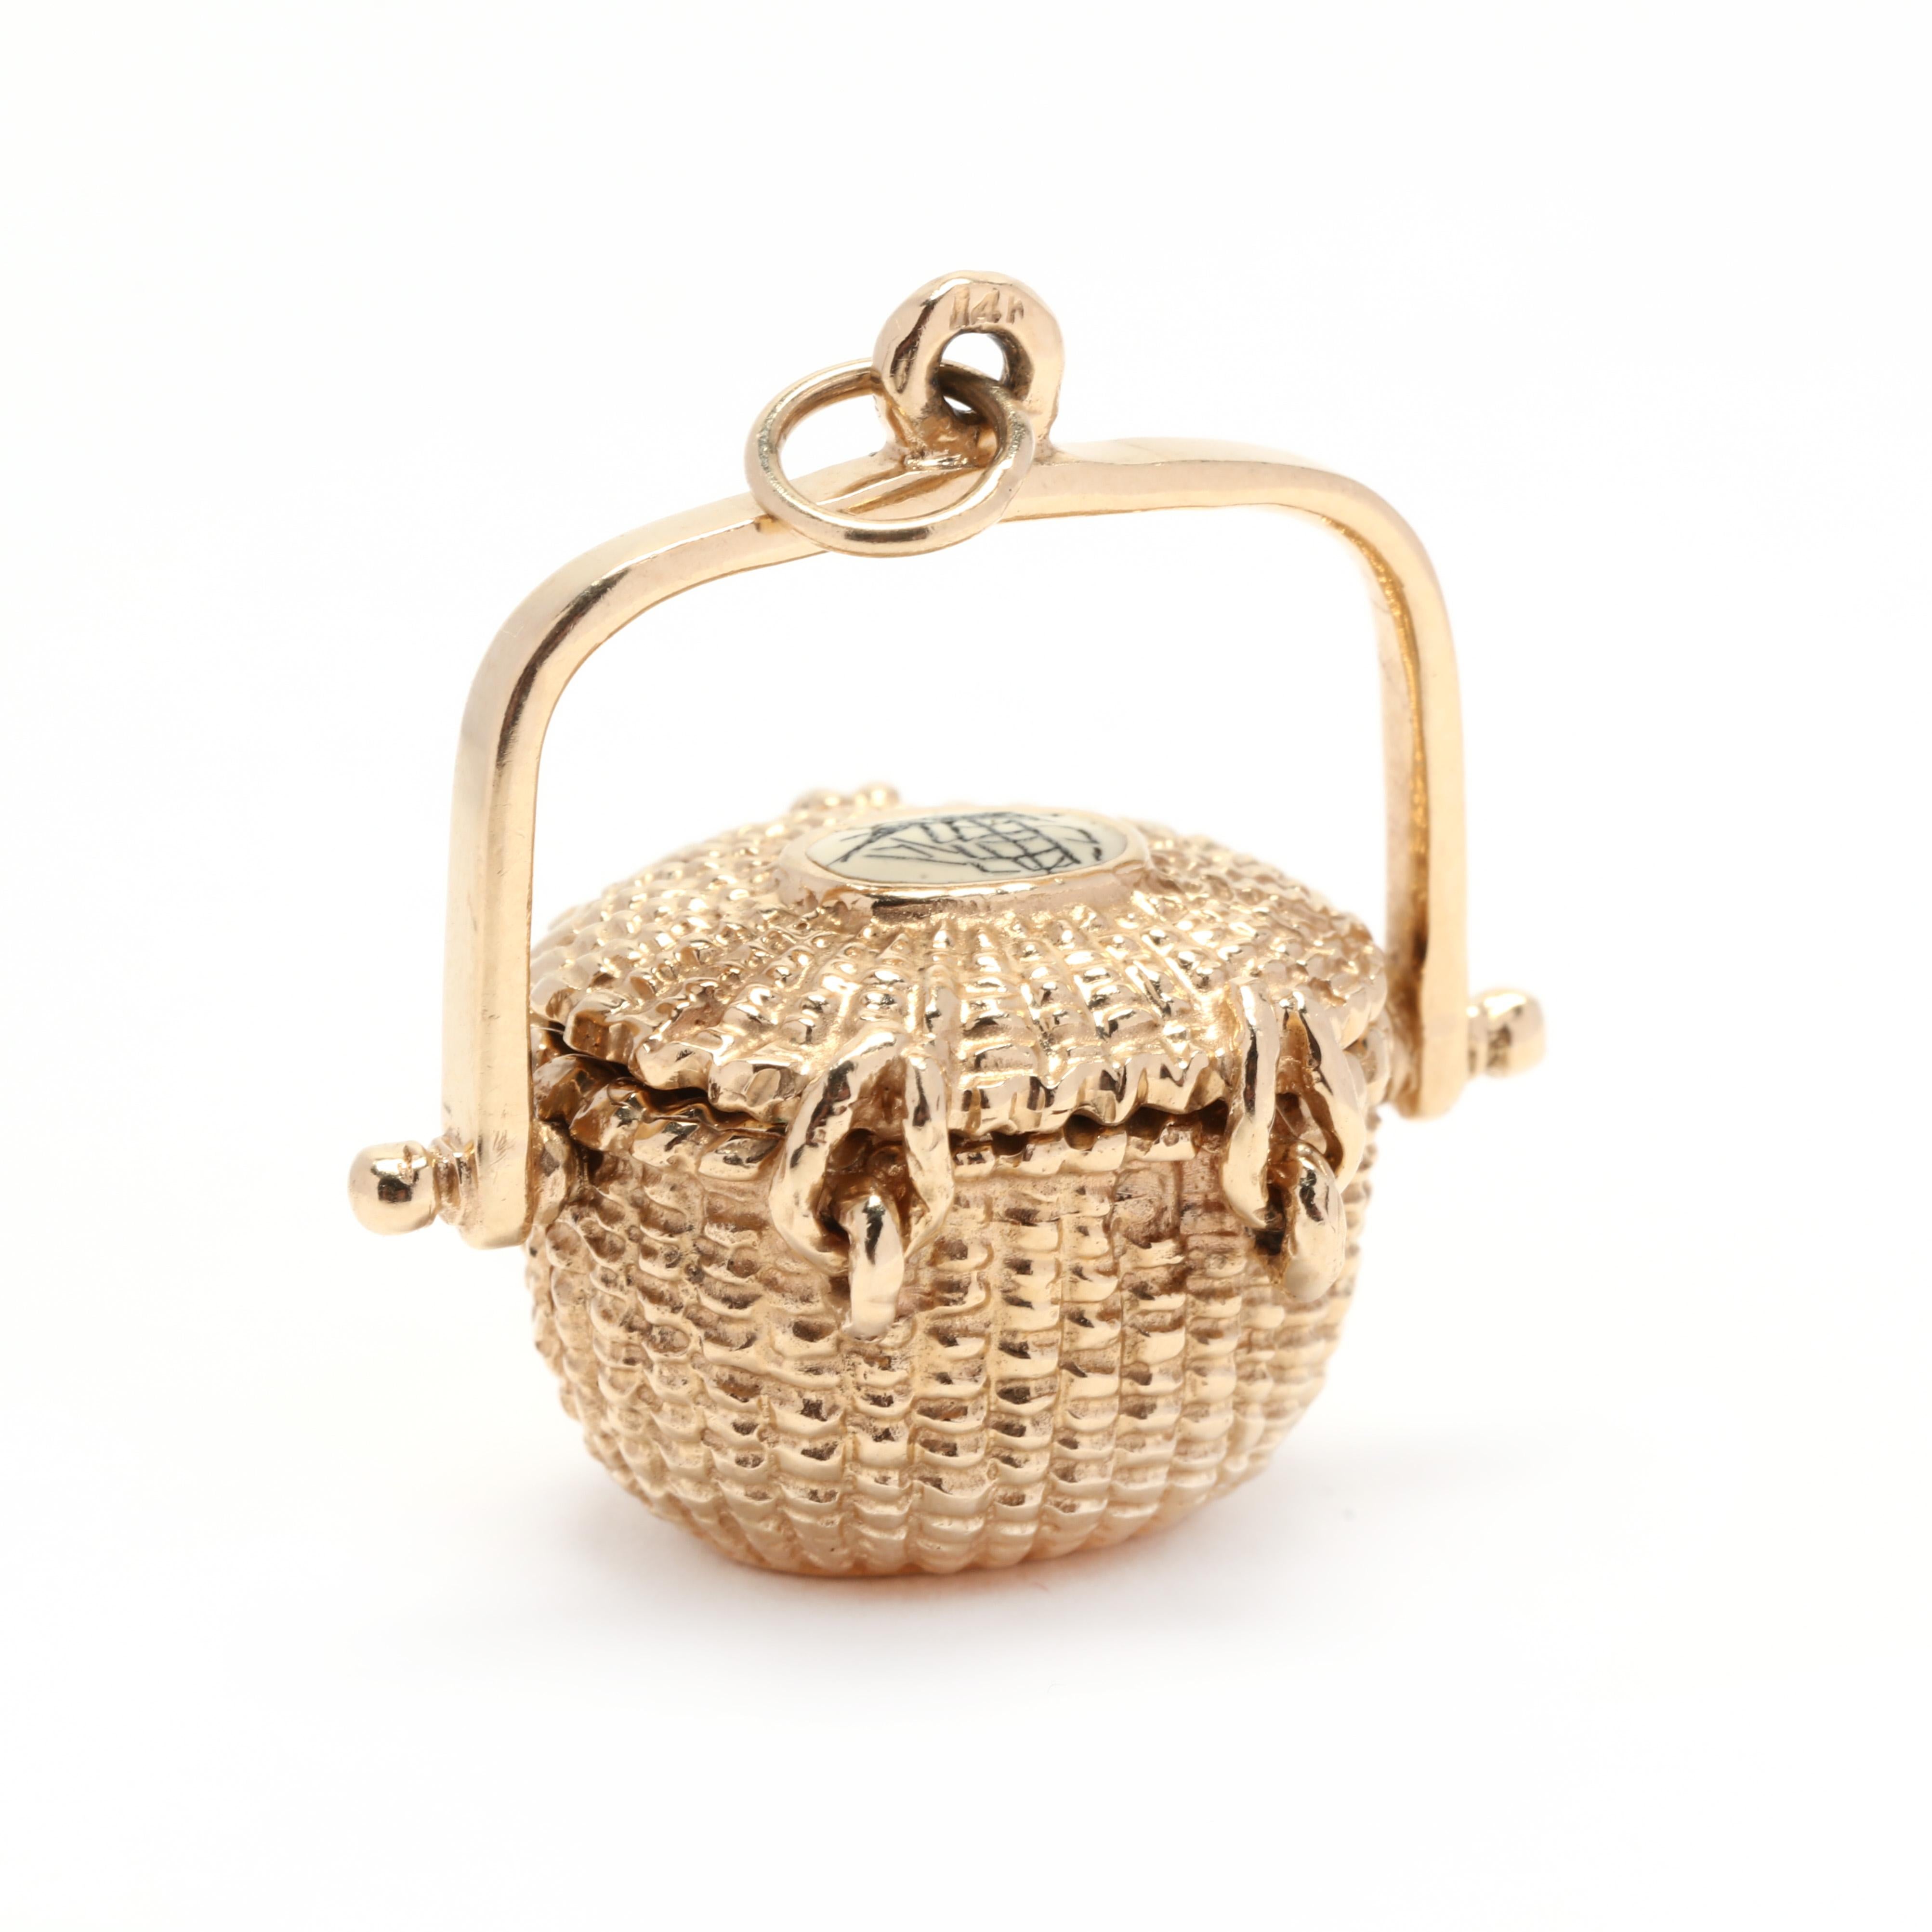 A 14 karat yellow gold Nantucket basket charm. A textured basket design with an articulated lid and an oval plaque on top depicting a ship, as well as a folding handle and designer engraving on the bottom.

Length: 1 1/4 in.

Width: 1 in.

7.1